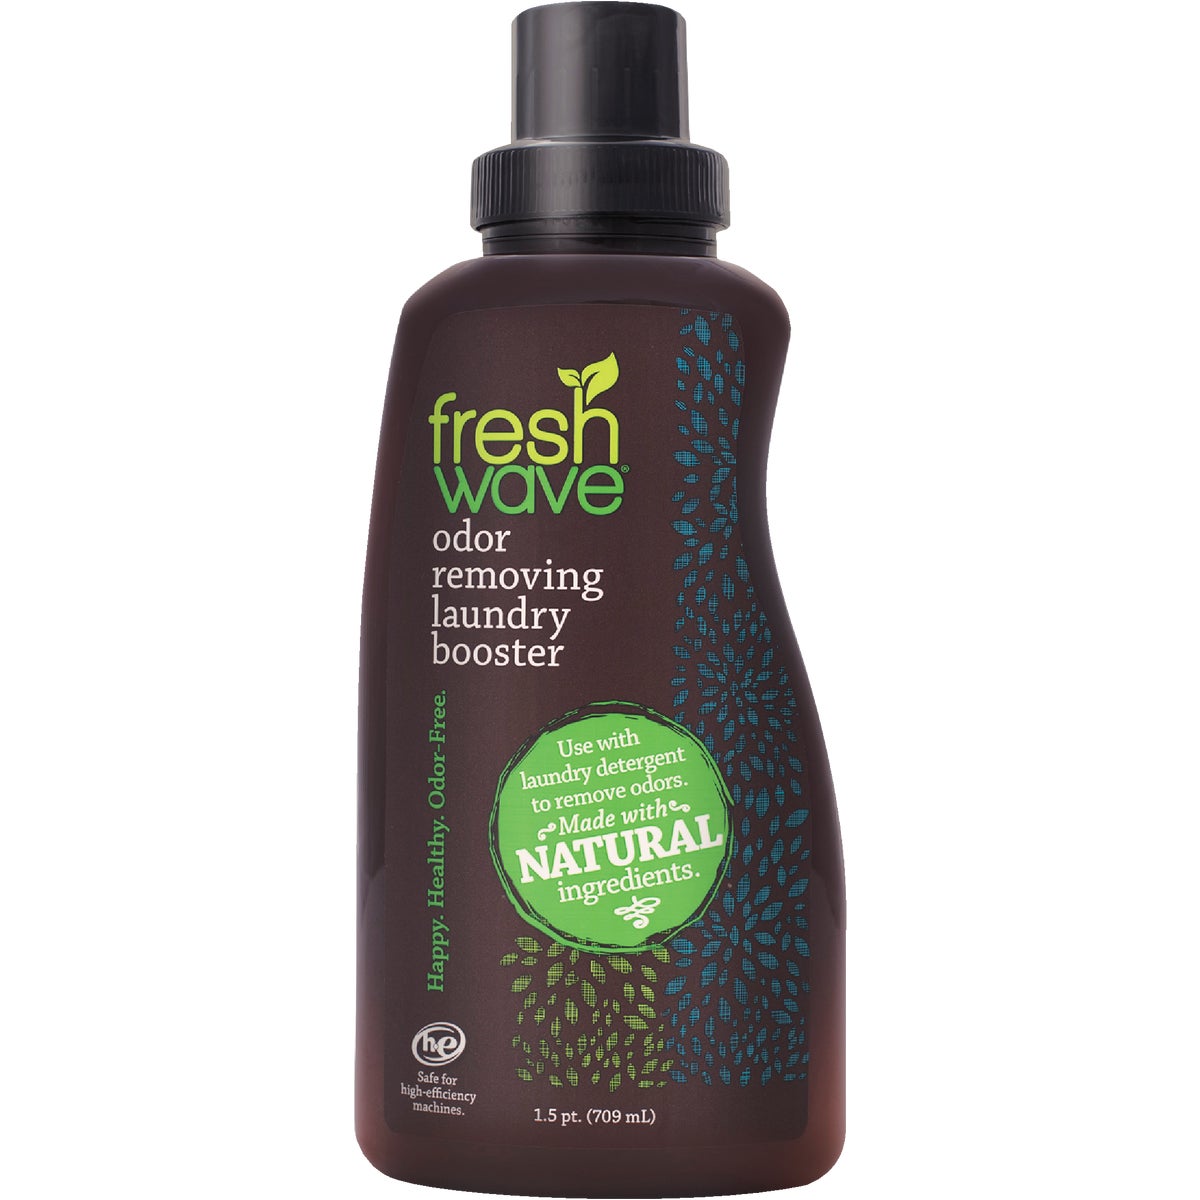 Fresh Wave 24 Oz. Odor Removing Laundry Booster